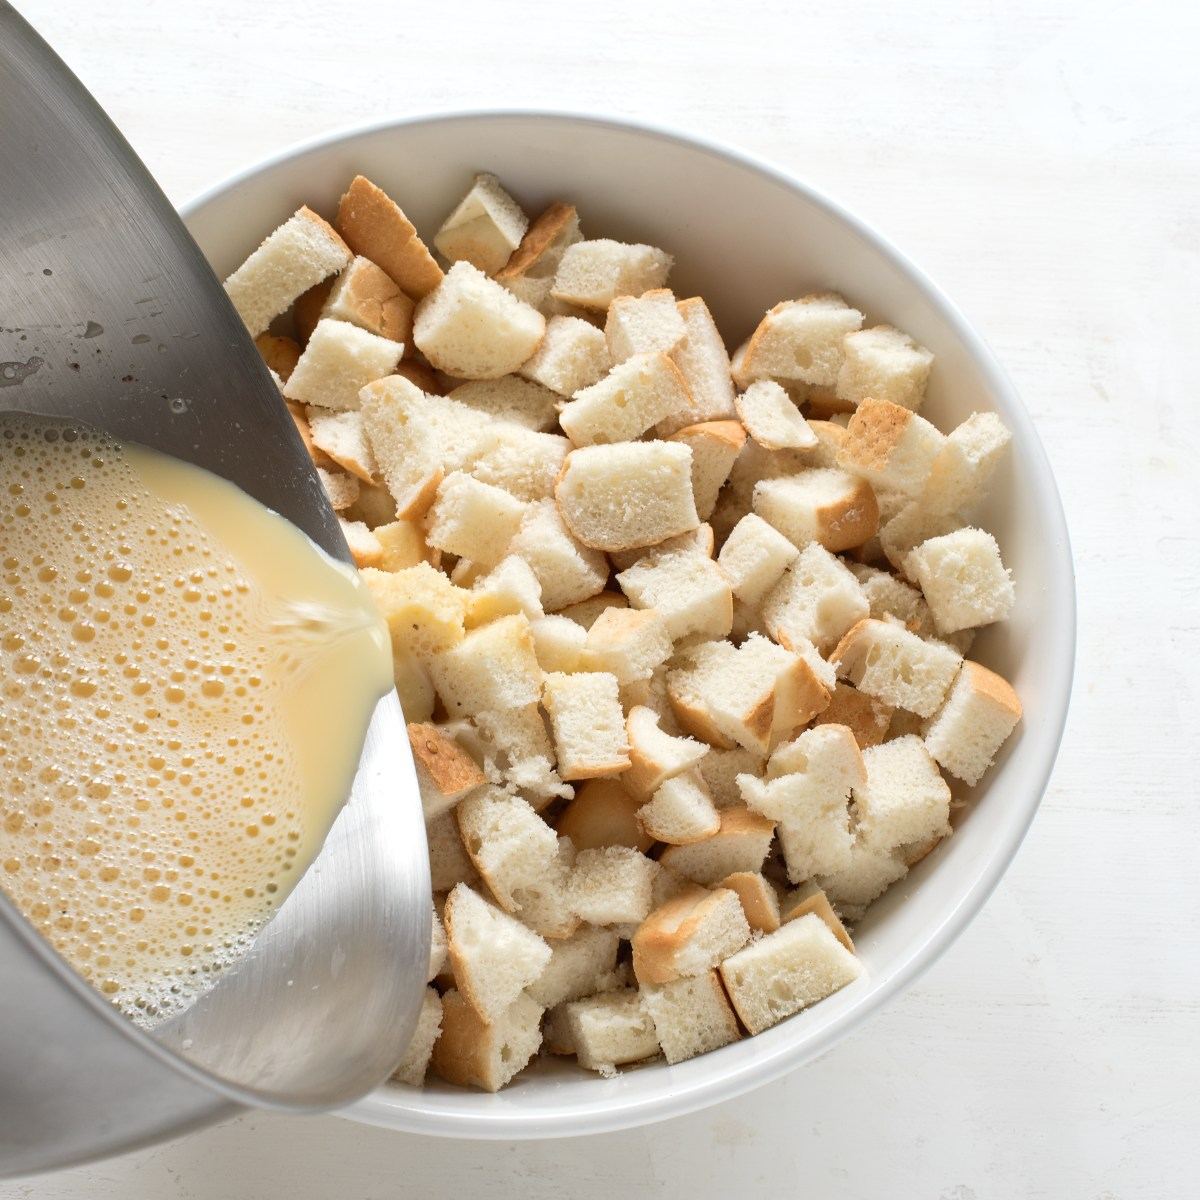 Cubes of white bread in a bowl, poured over with a mixture of egg yolks, milk and seasoning.